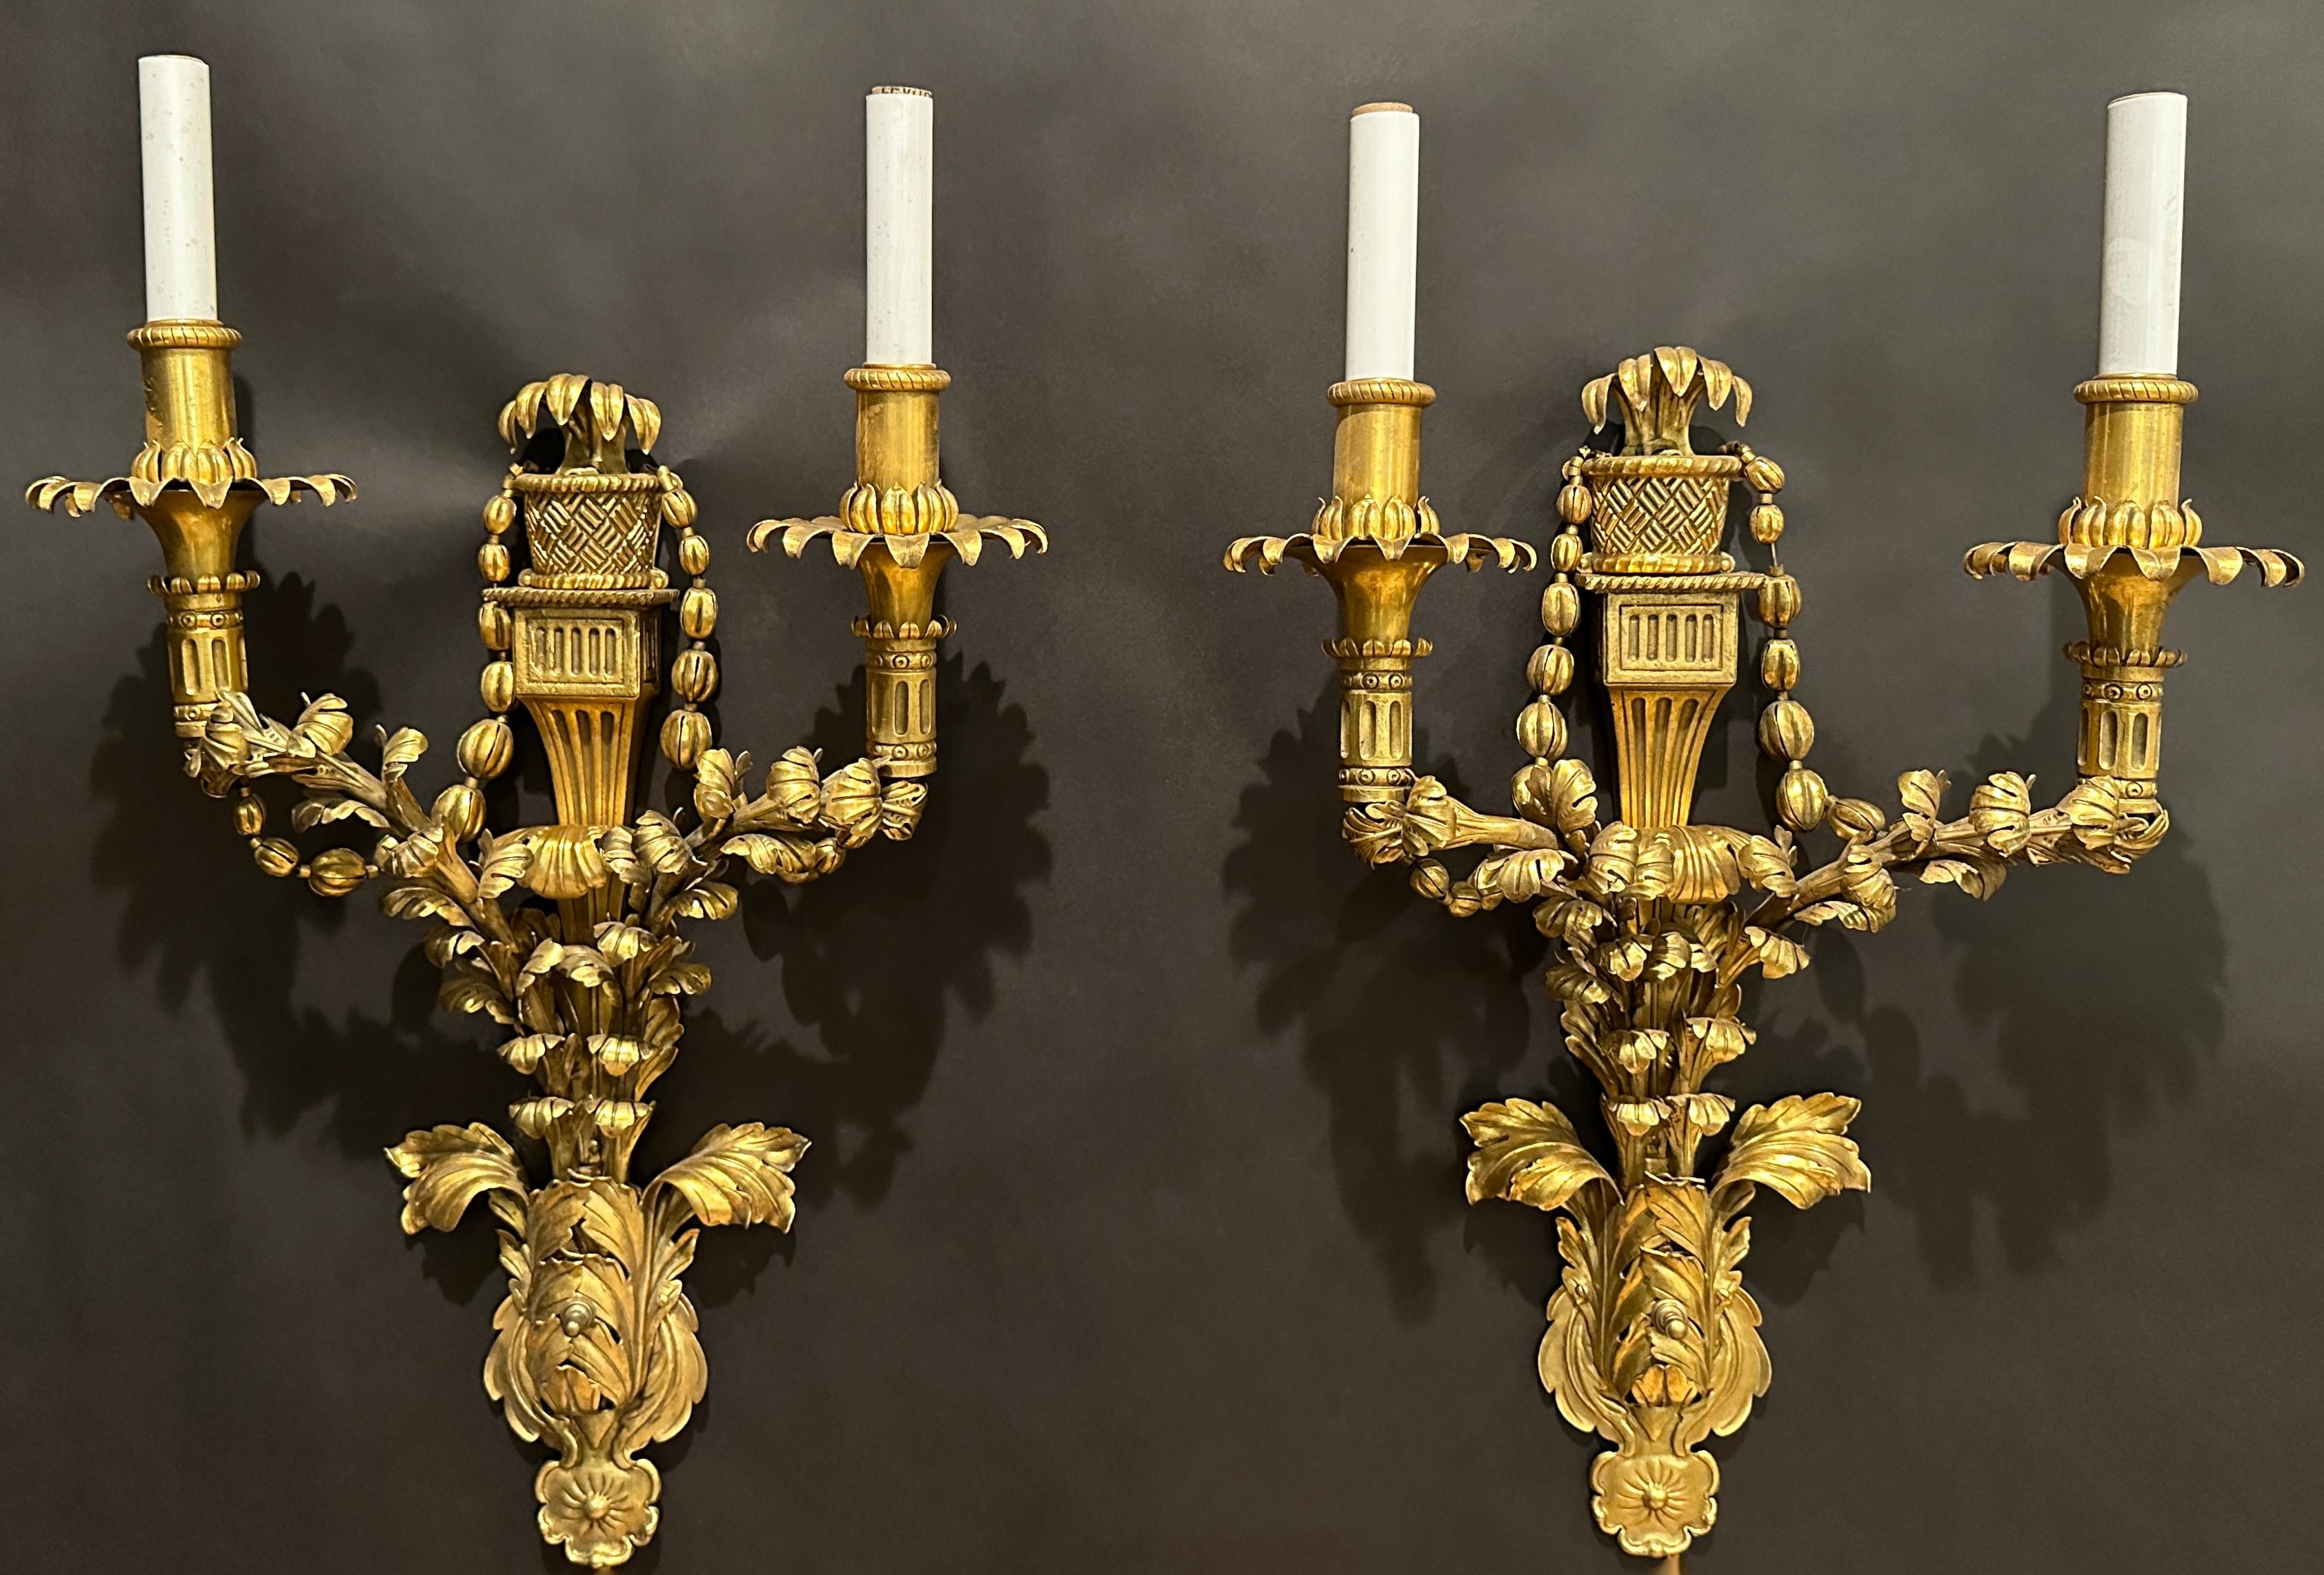 Antique gilt bronze electrified sconces, American, circa 1910. Floral design. Beautiful garland hangs from each light. Attributed to E.F. Caldwell & Co.